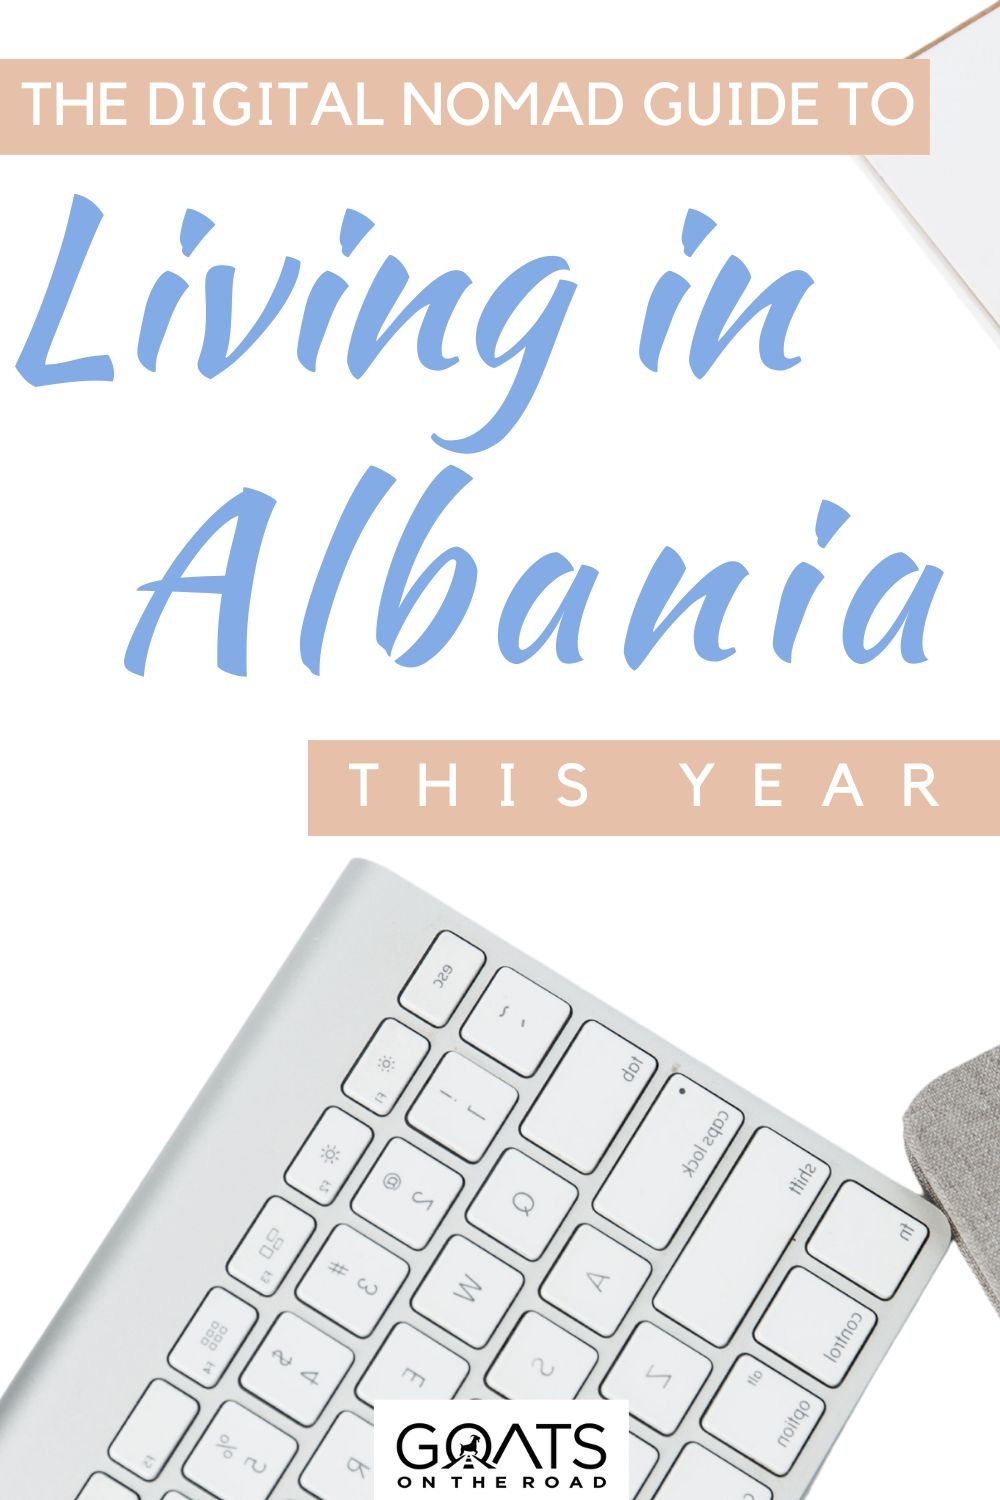 “The Digital Nomad Guide to Living in Albania